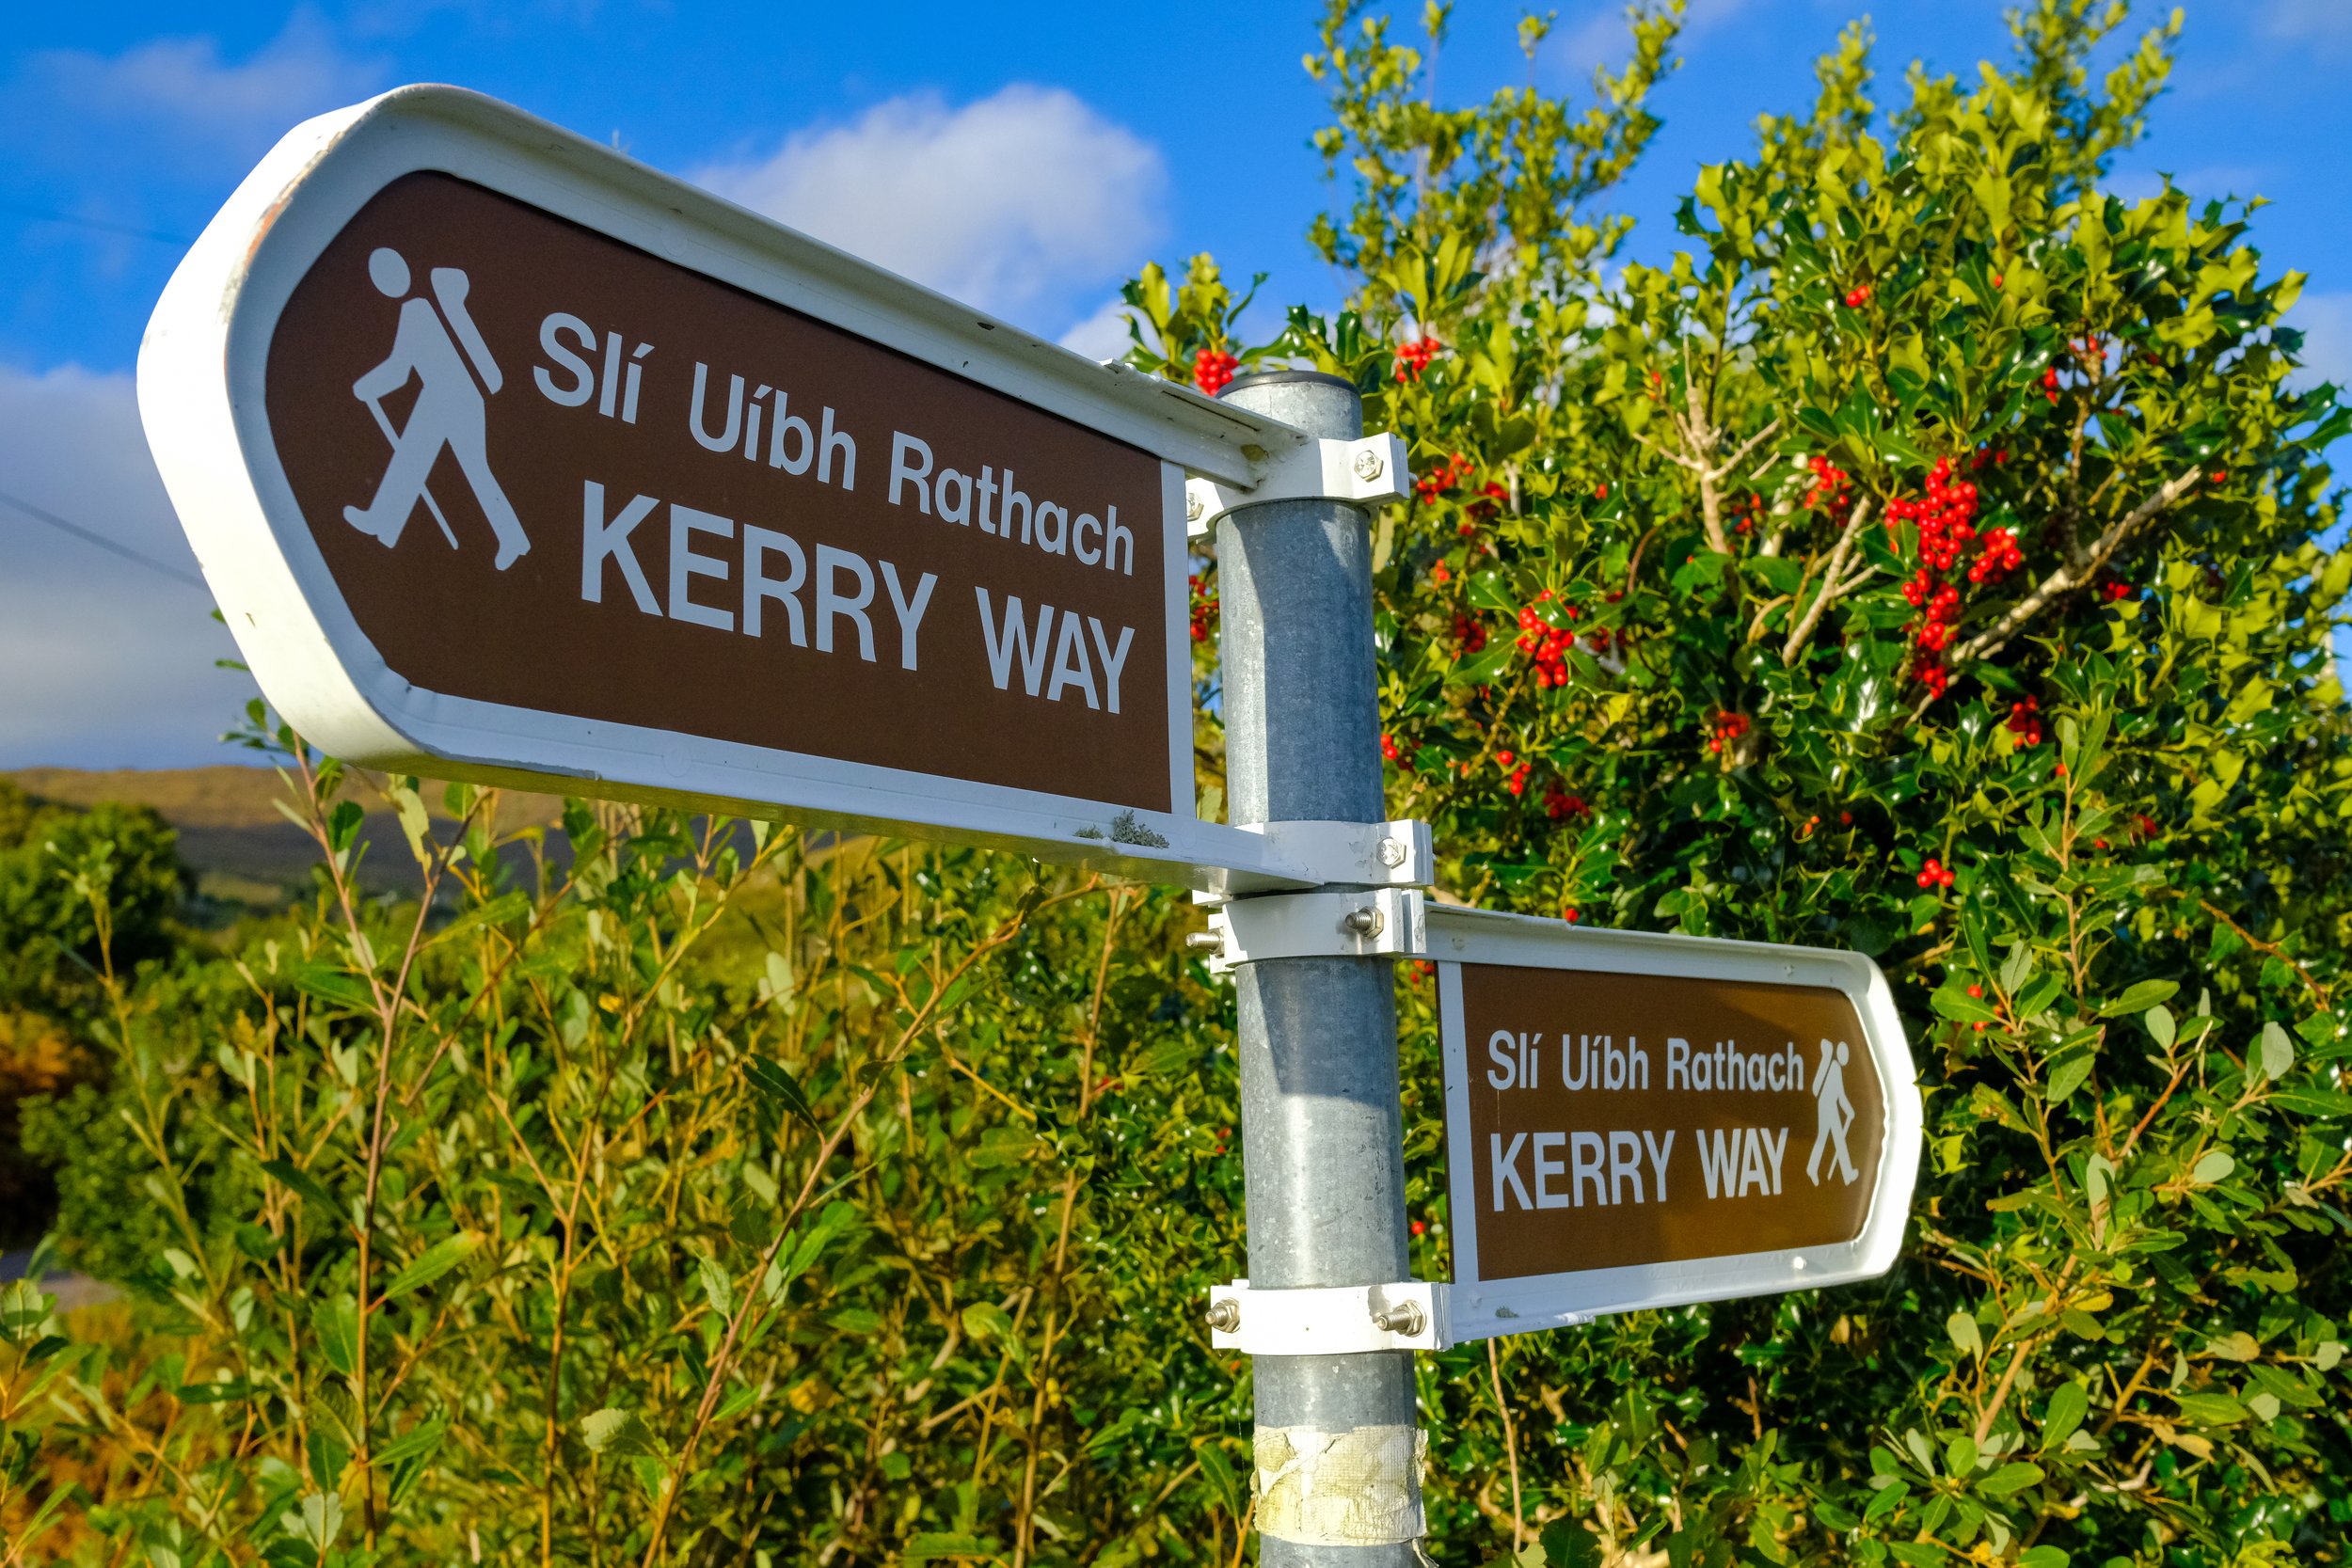 1a_Kerry way trails are quieter and full of radiant colour in autumn. Photo credit Calum Sweeney.jpg